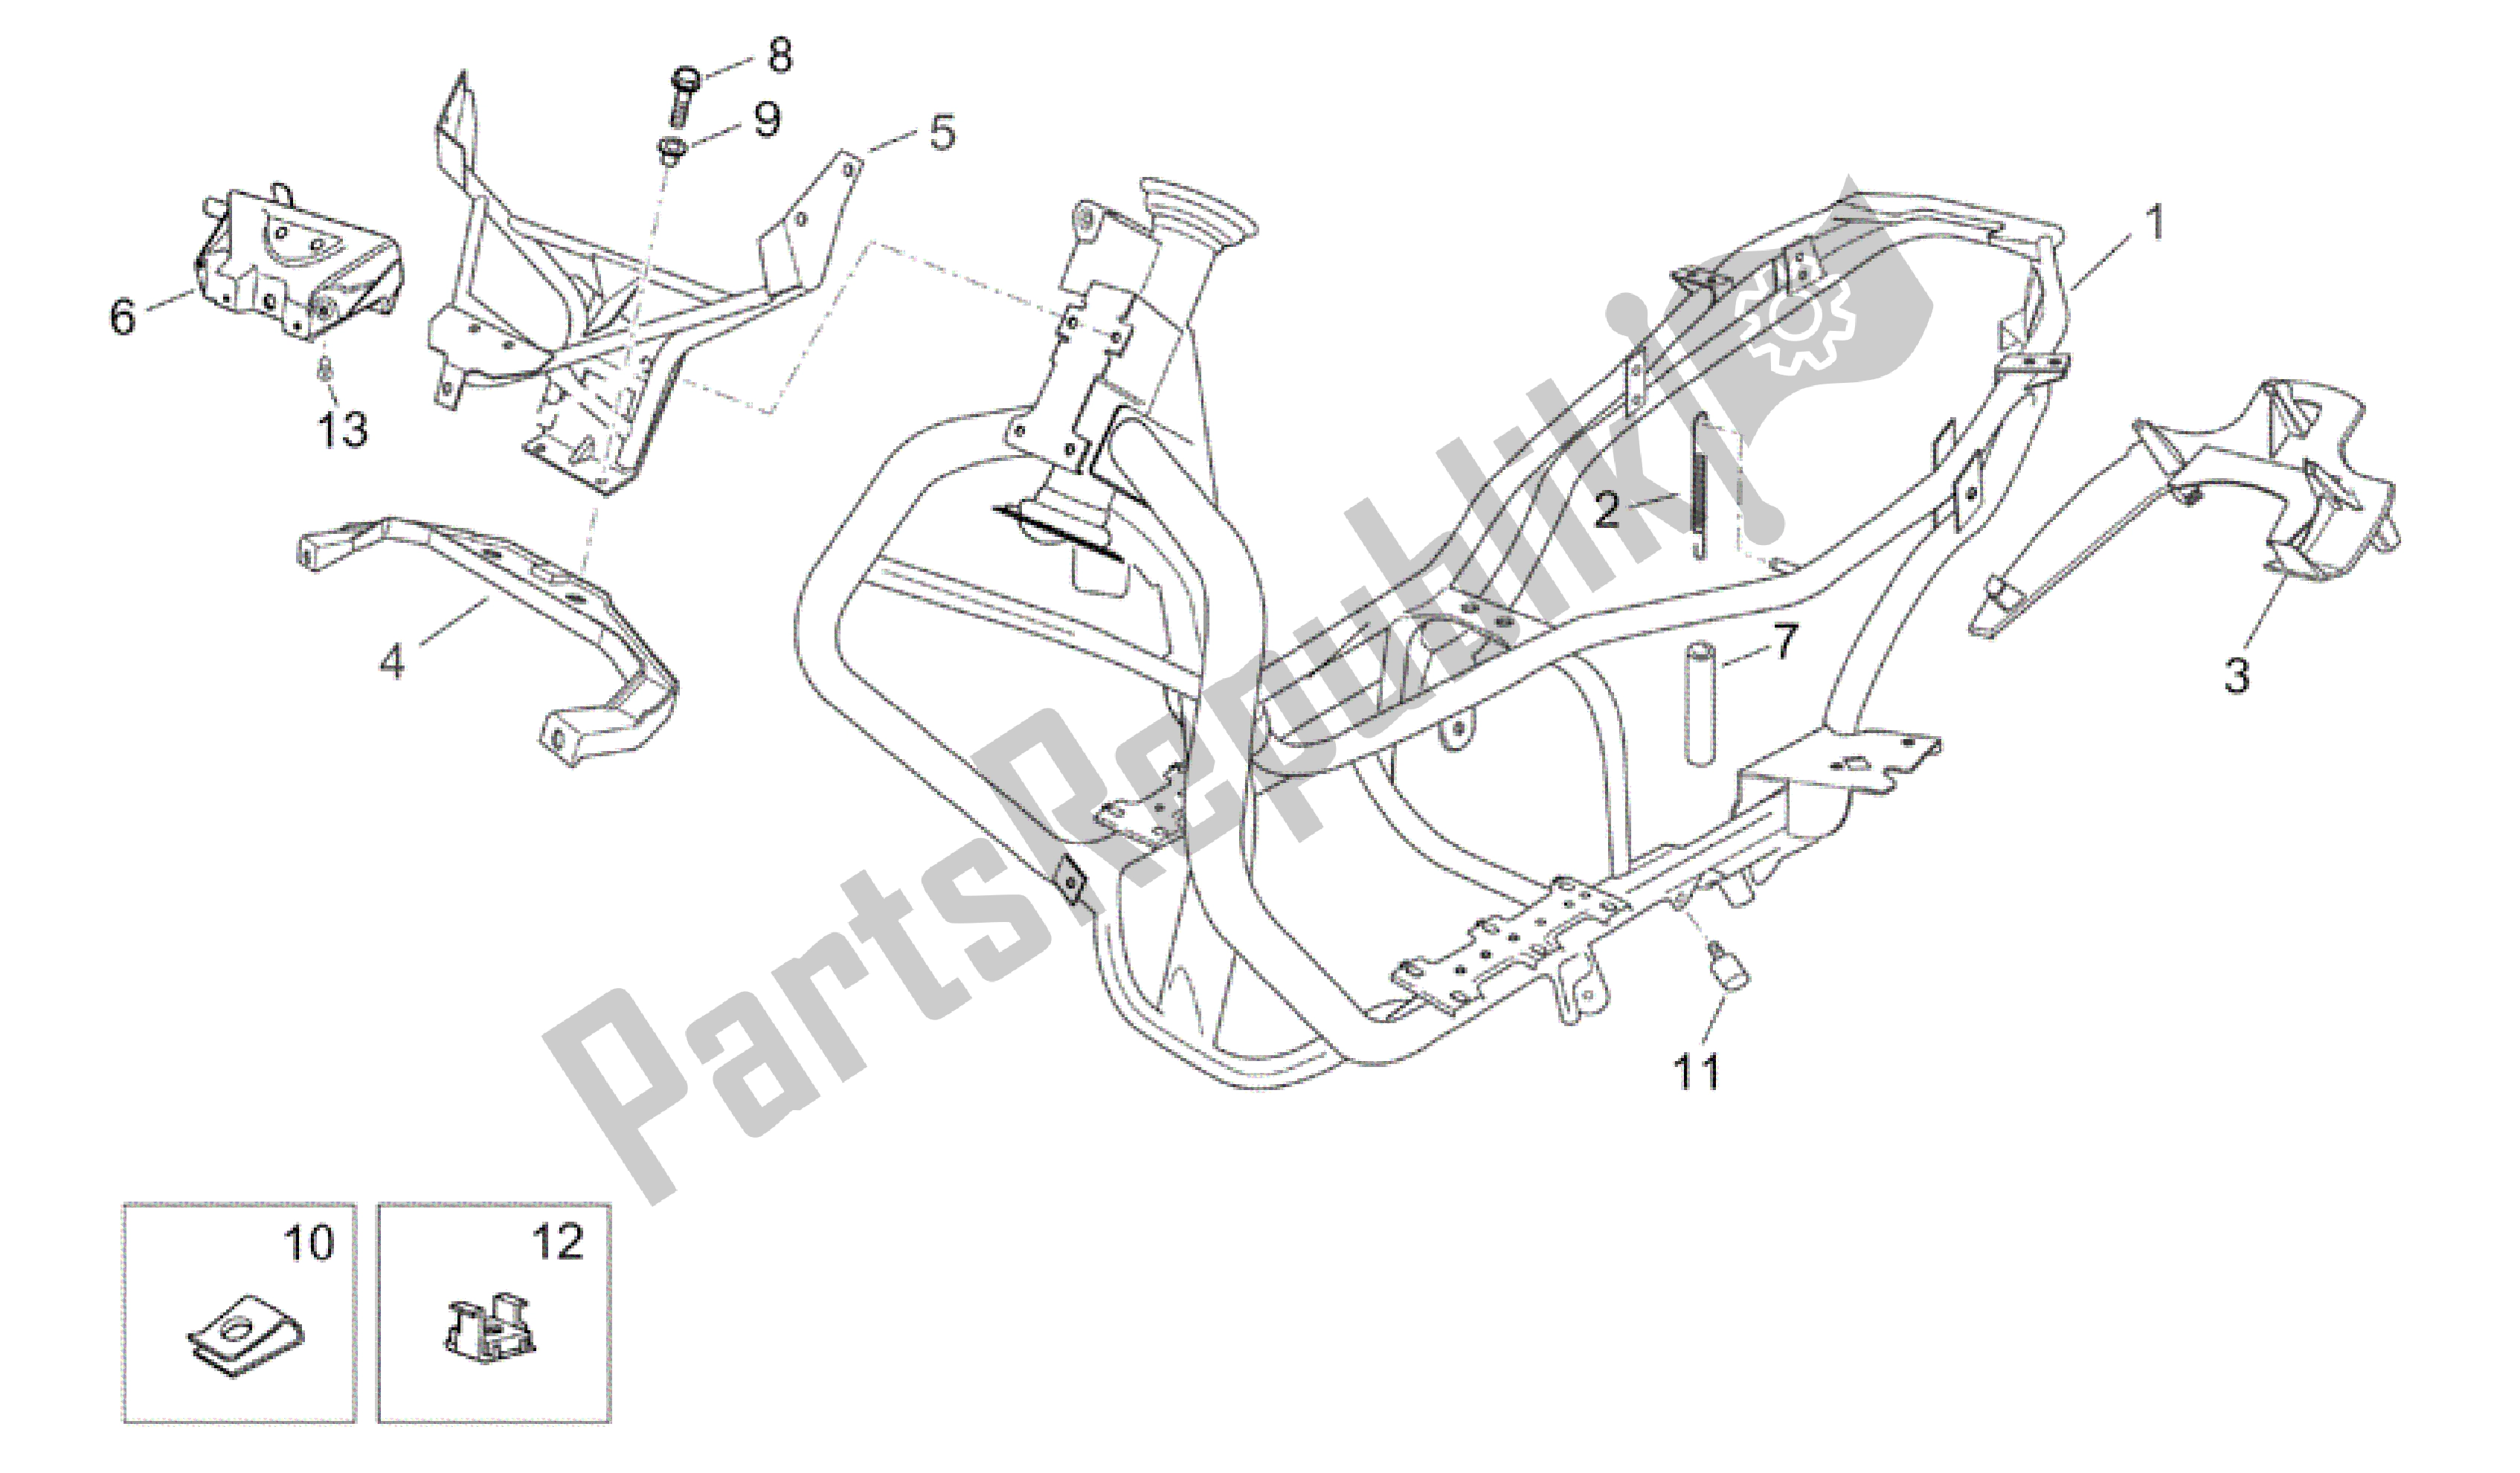 All parts for the Frame of the Aprilia Atlantic 125 2003 - 2006